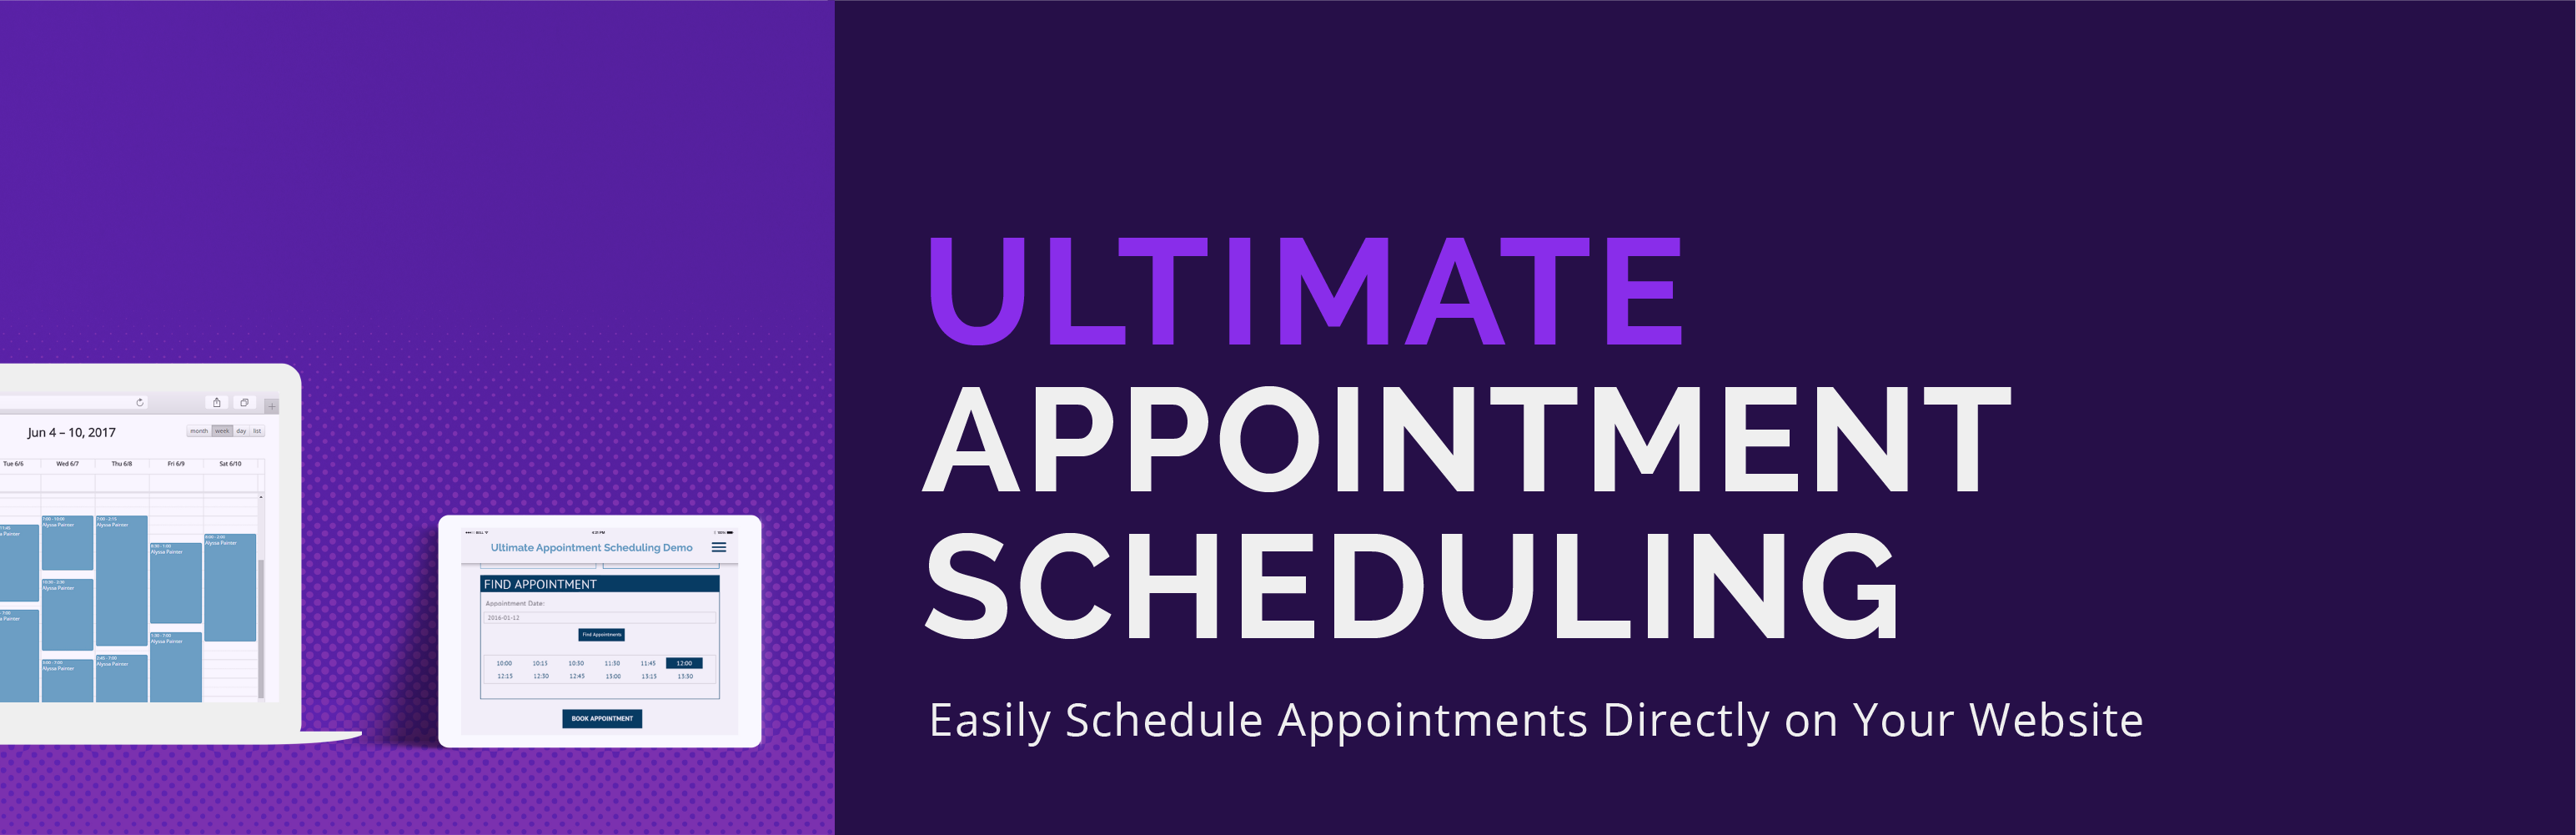 Ultimate Appointment Scheduling